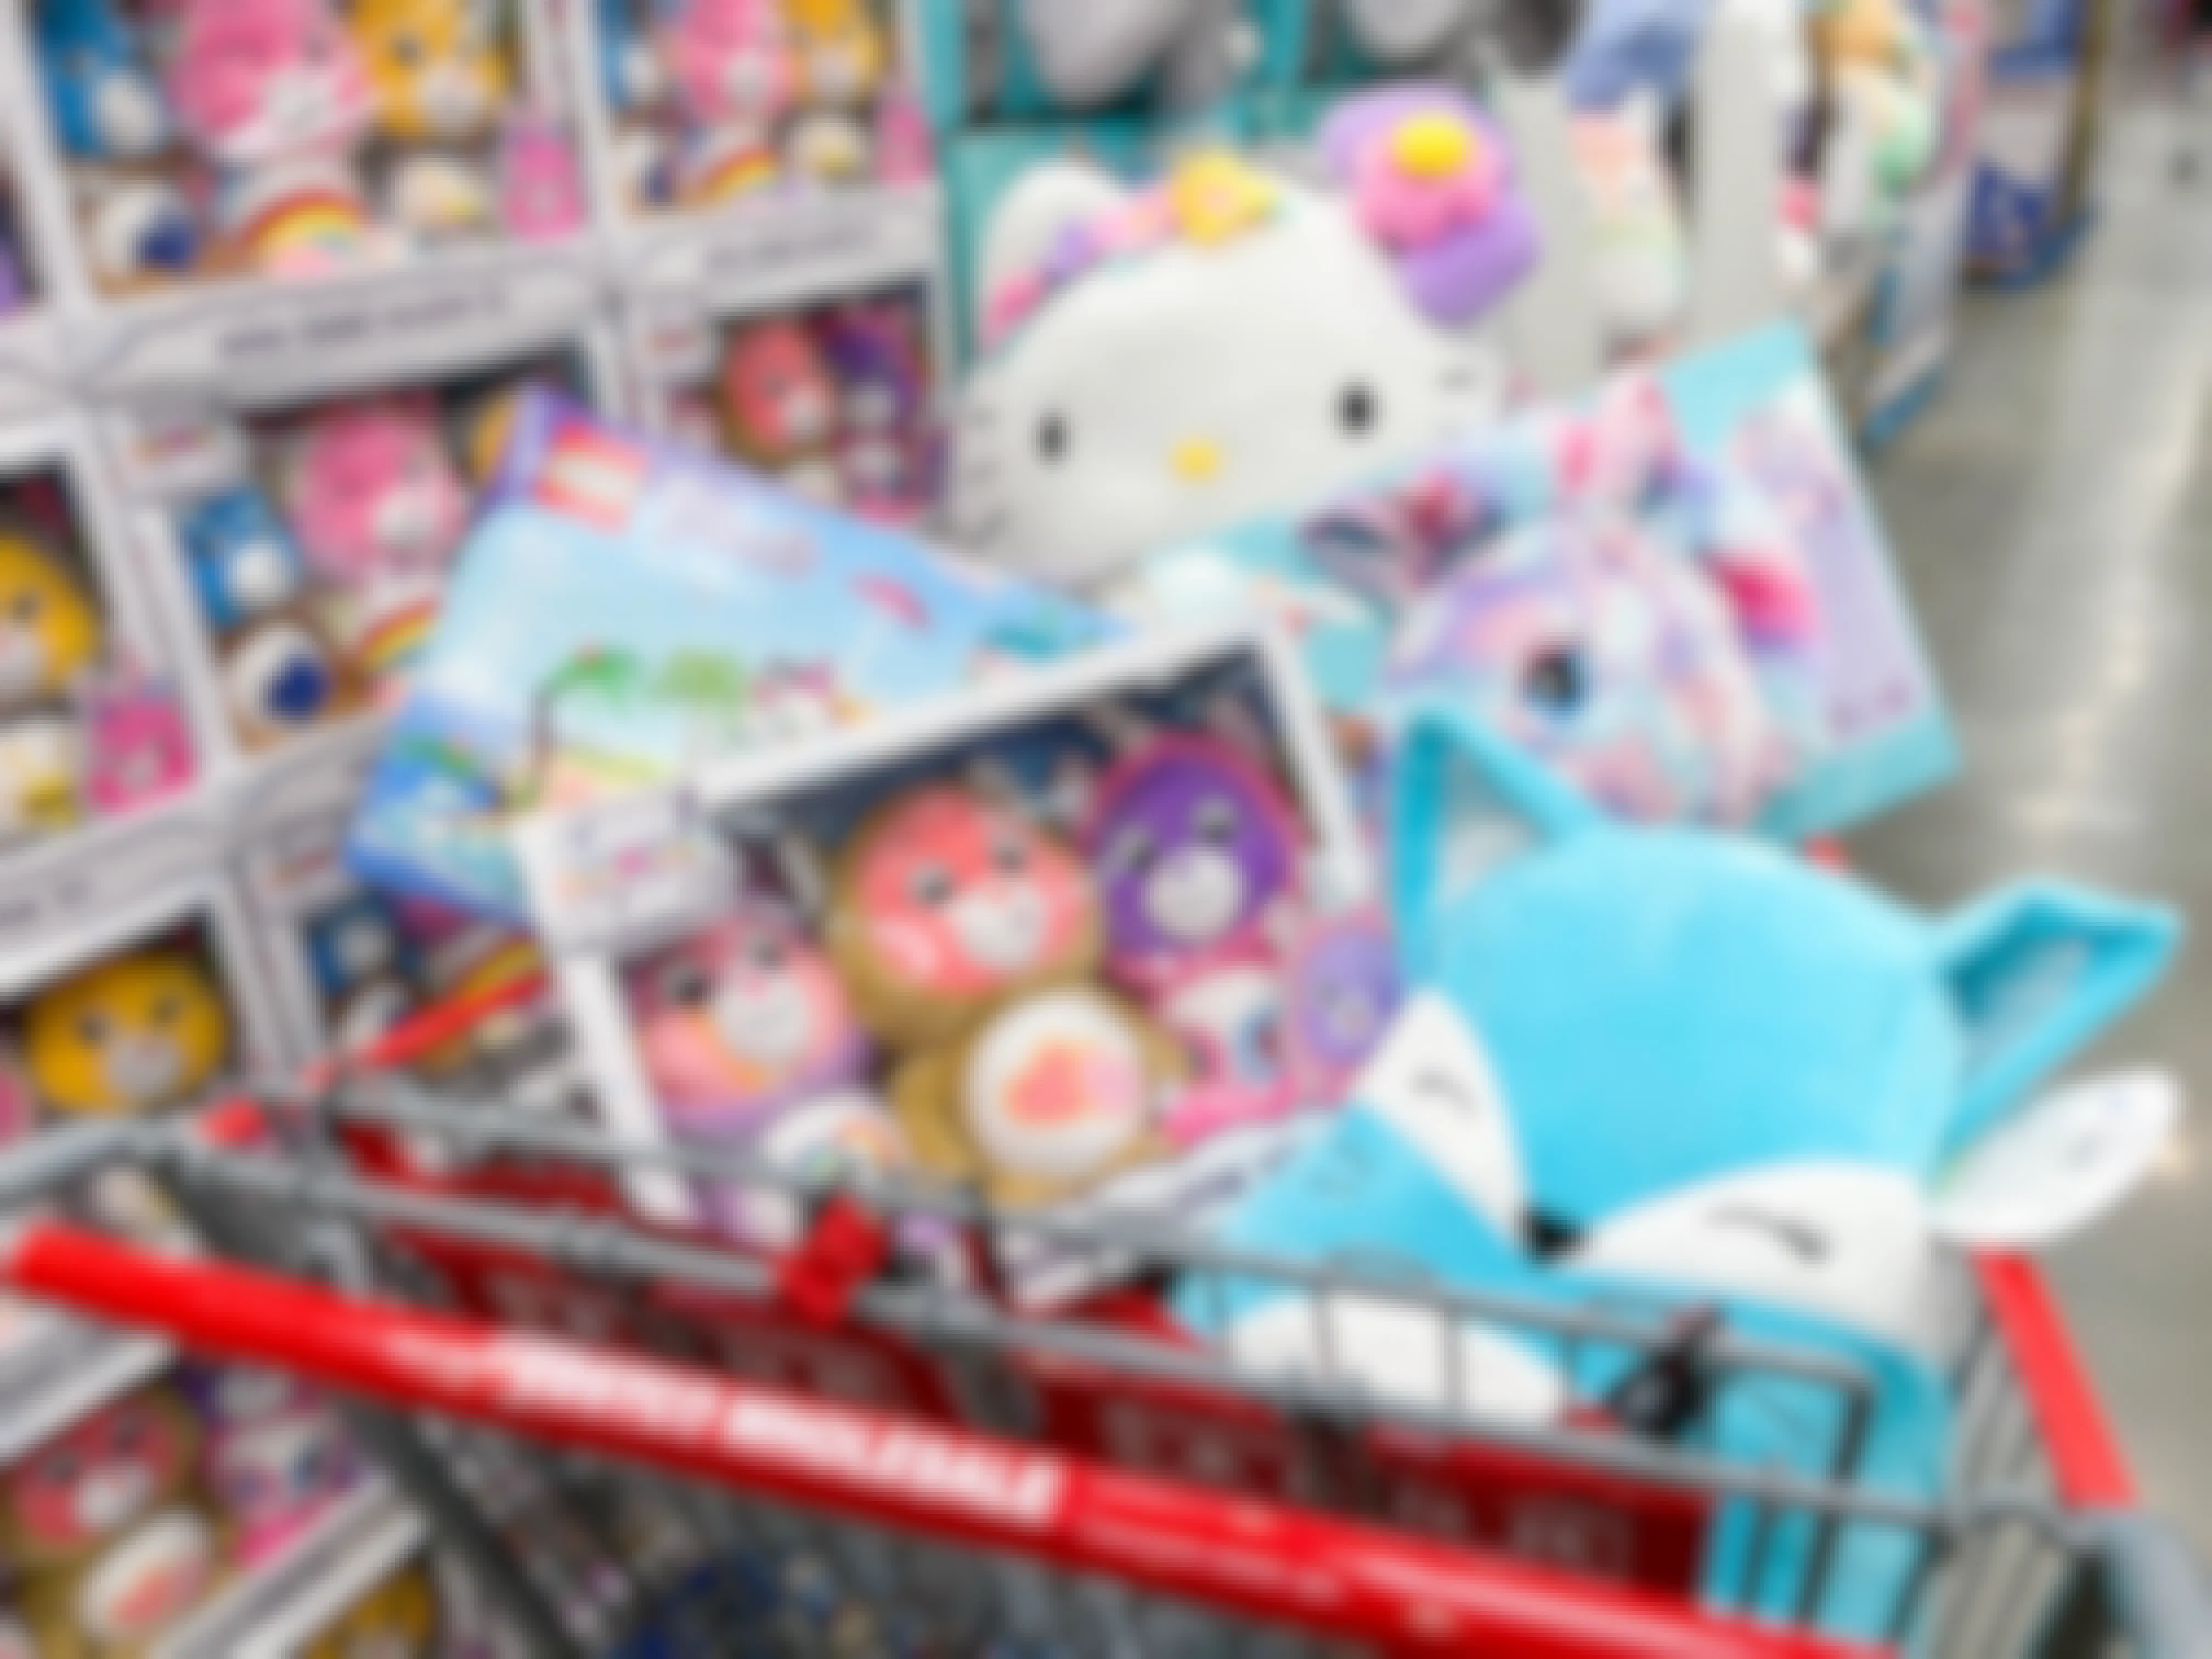 costco toys in cart